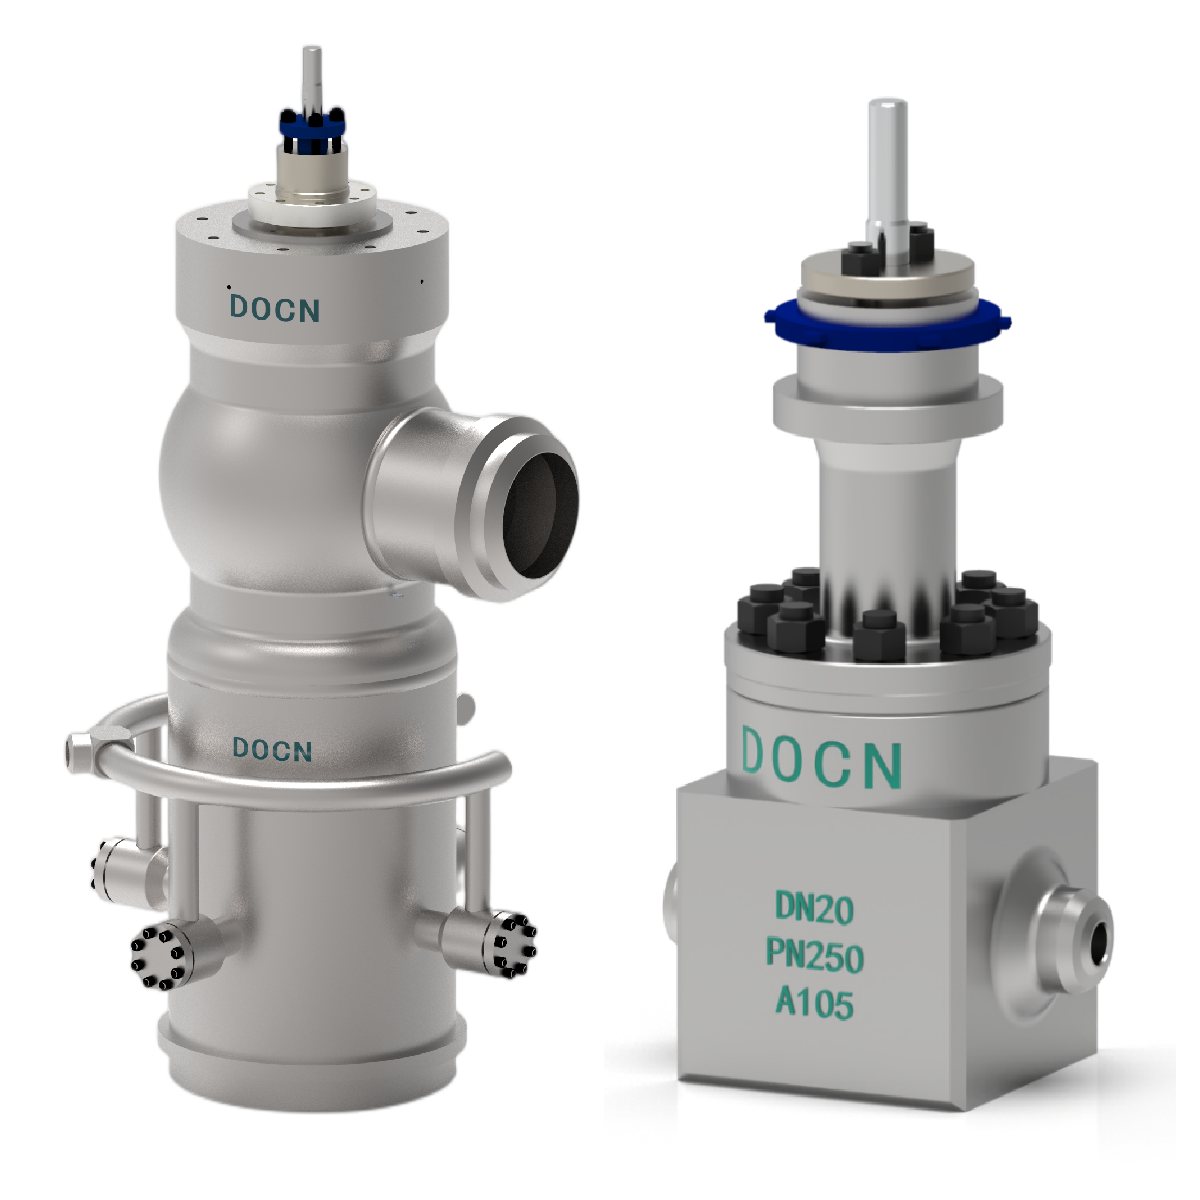 How It Works? - Dongchen DC3700 Bypass Valve